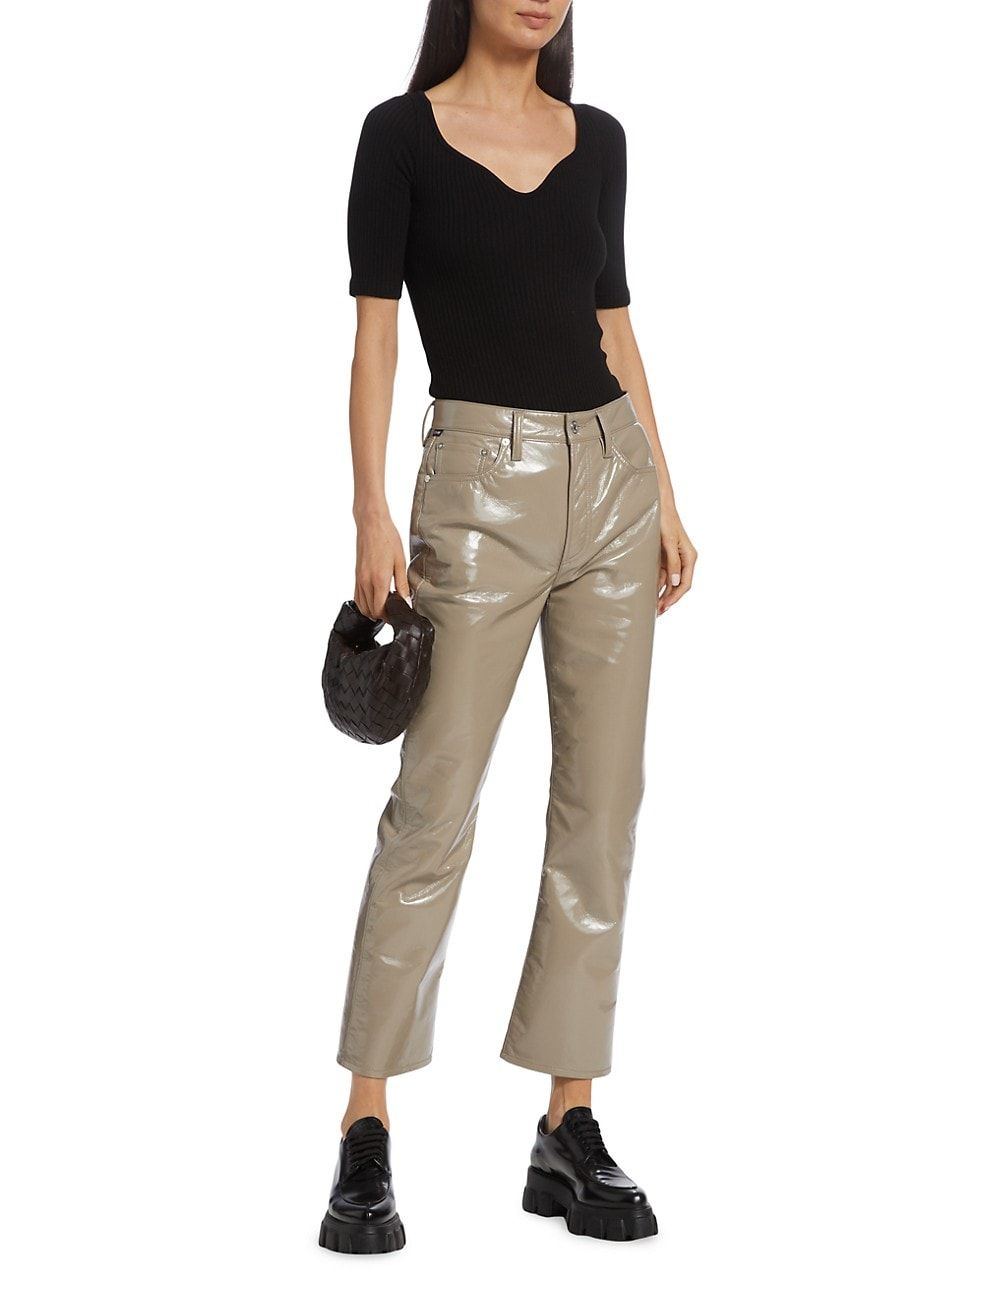 Isola Patent Leather Bootcut Pants | Saks Fifth Avenue